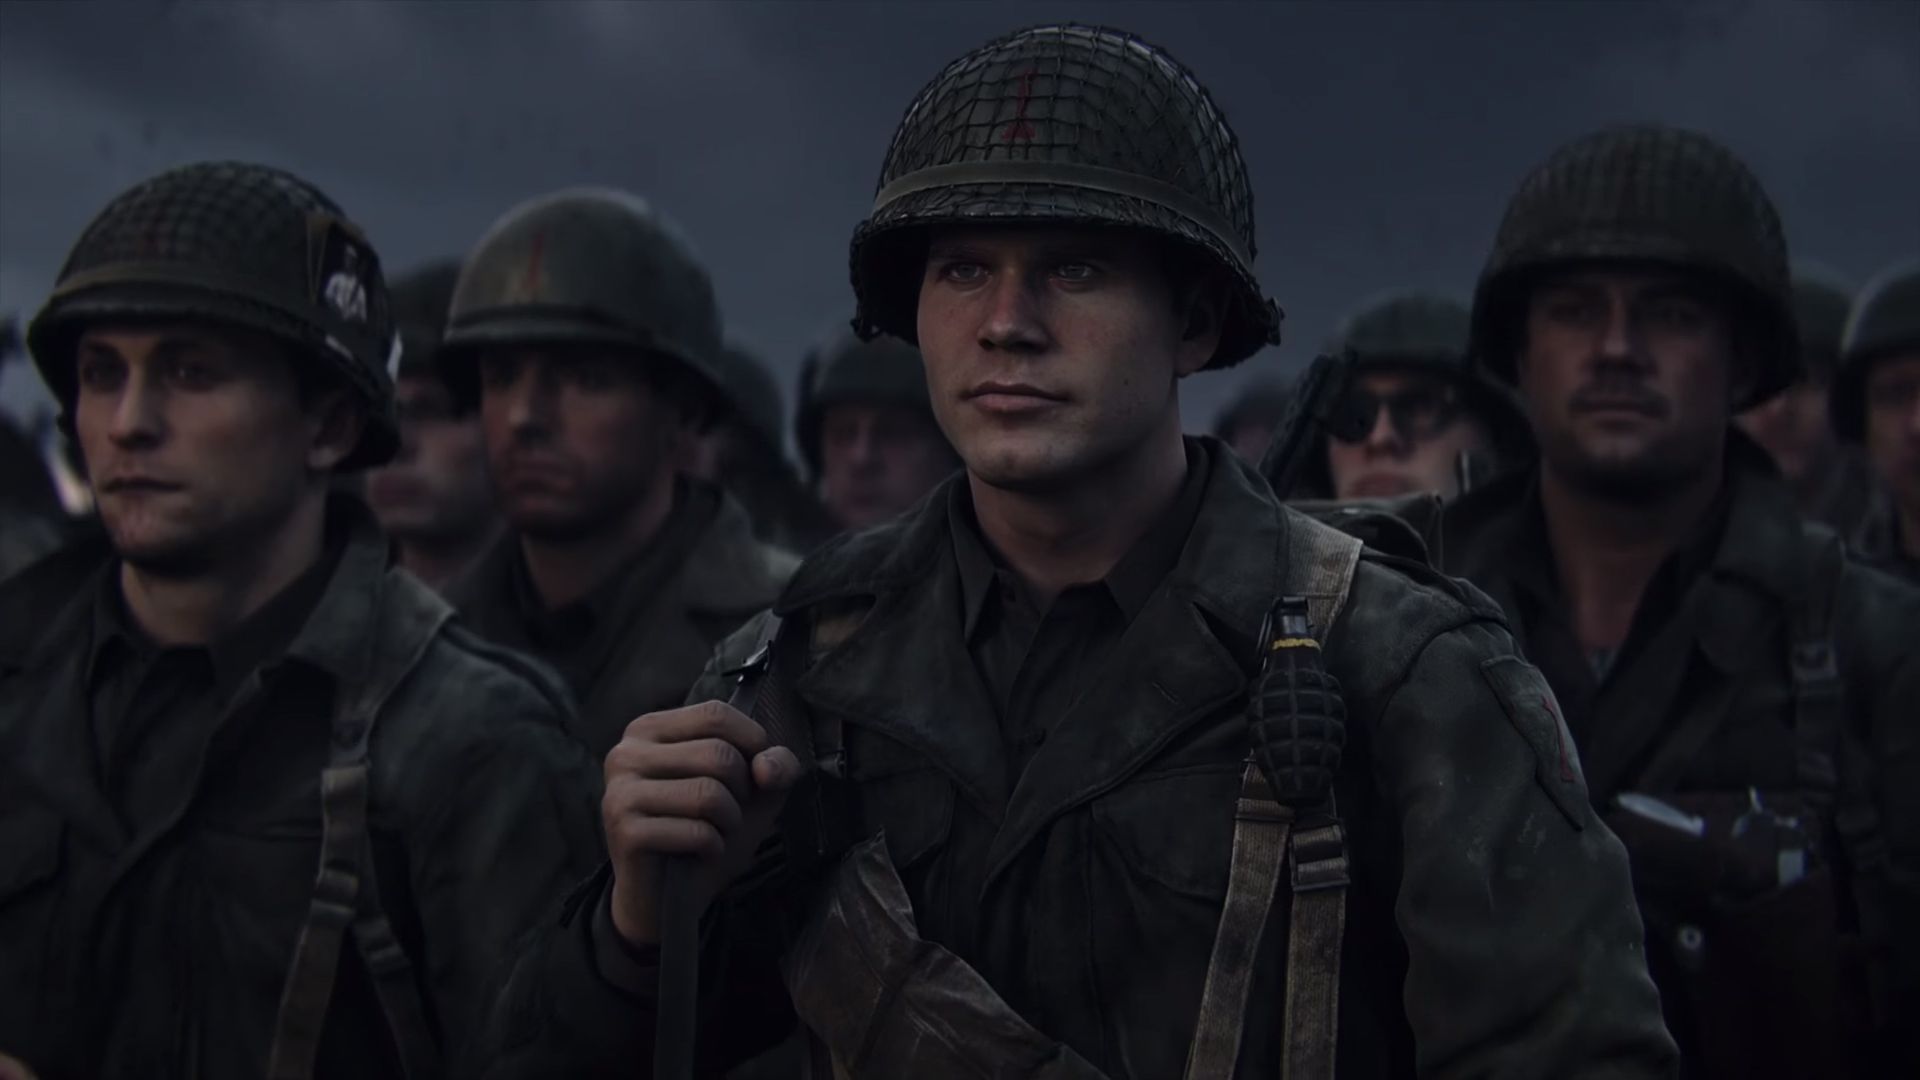 Meet A Few Of The Good Men In Our Squad For Call Of Duty: WWII